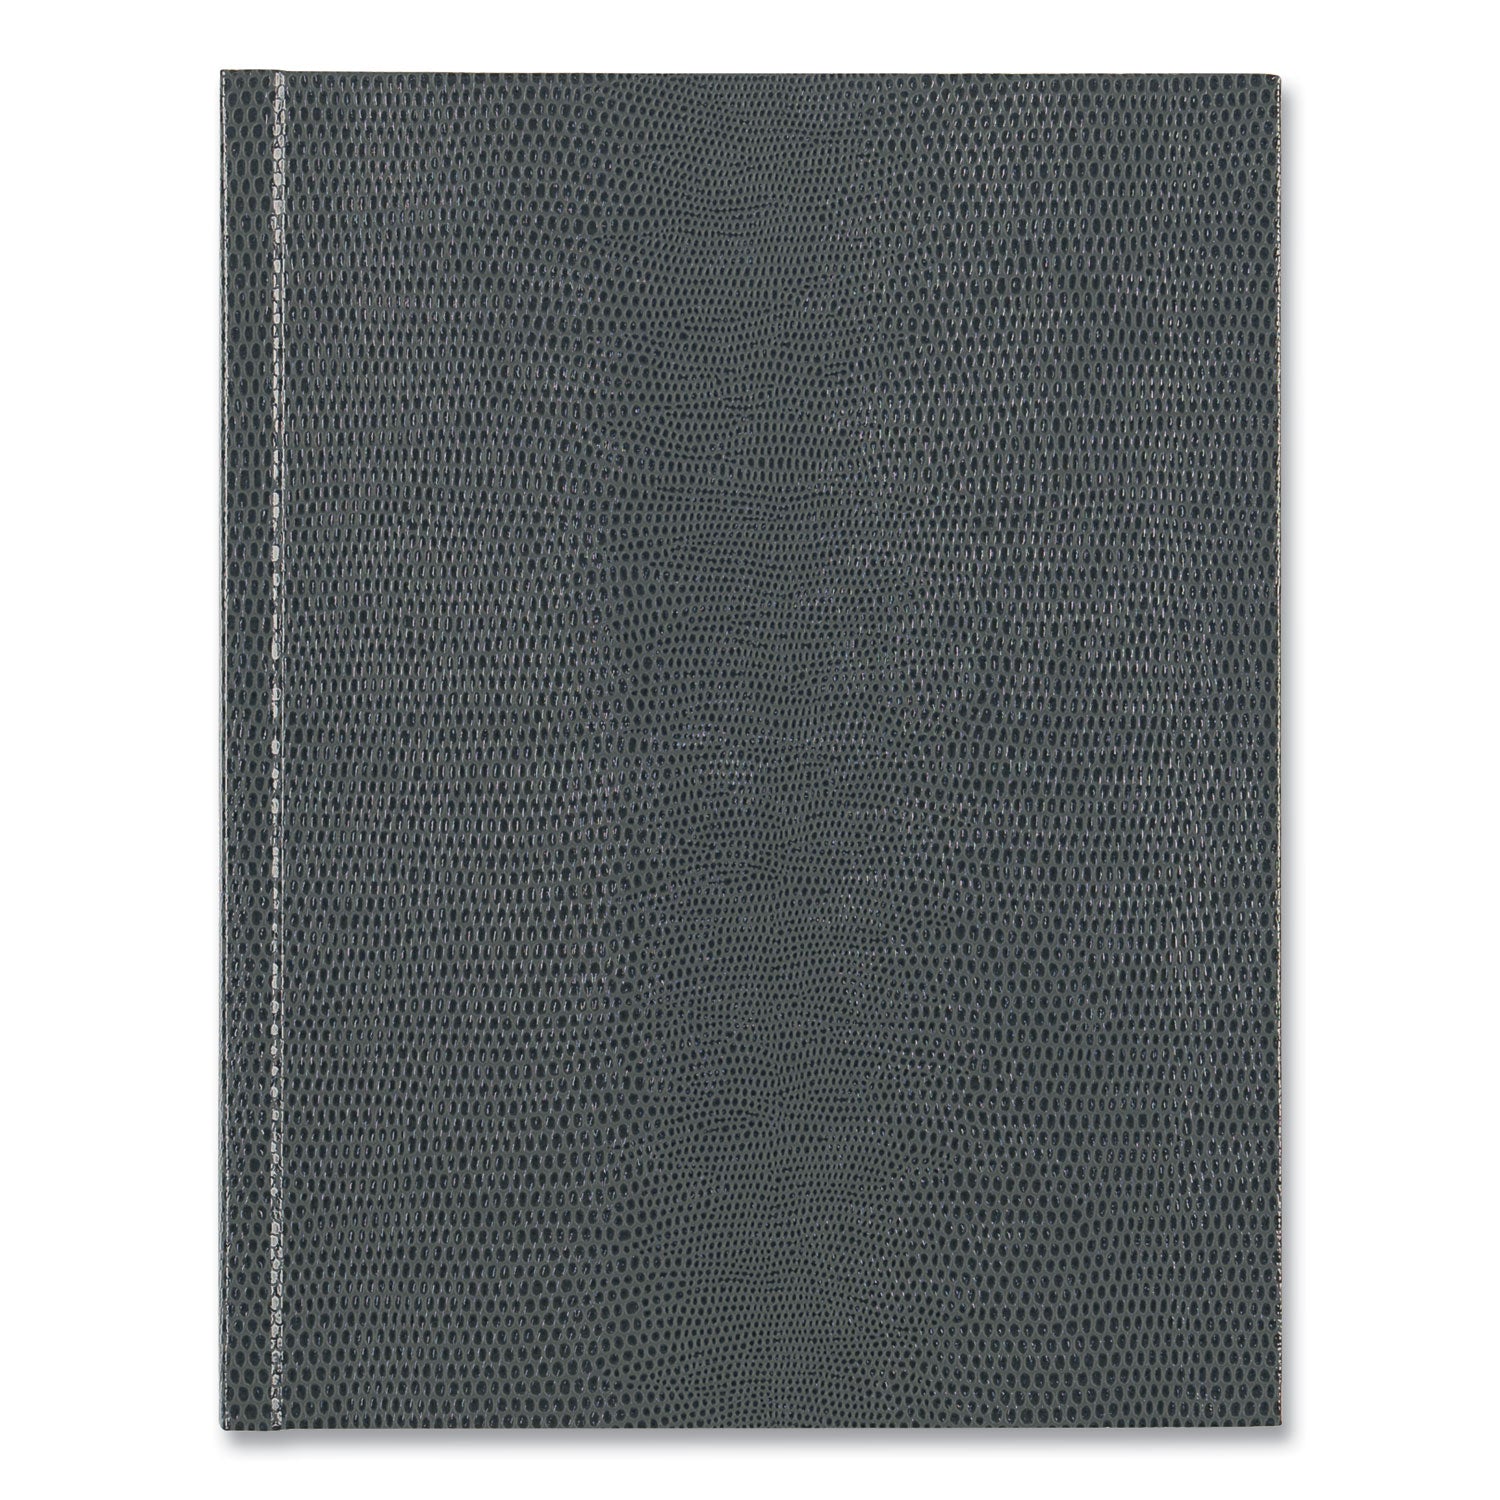 executive-notebook-1-subject-medium-college-rule-cool-gray-cover-72-925-x-725-sheets_reda7gry - 2